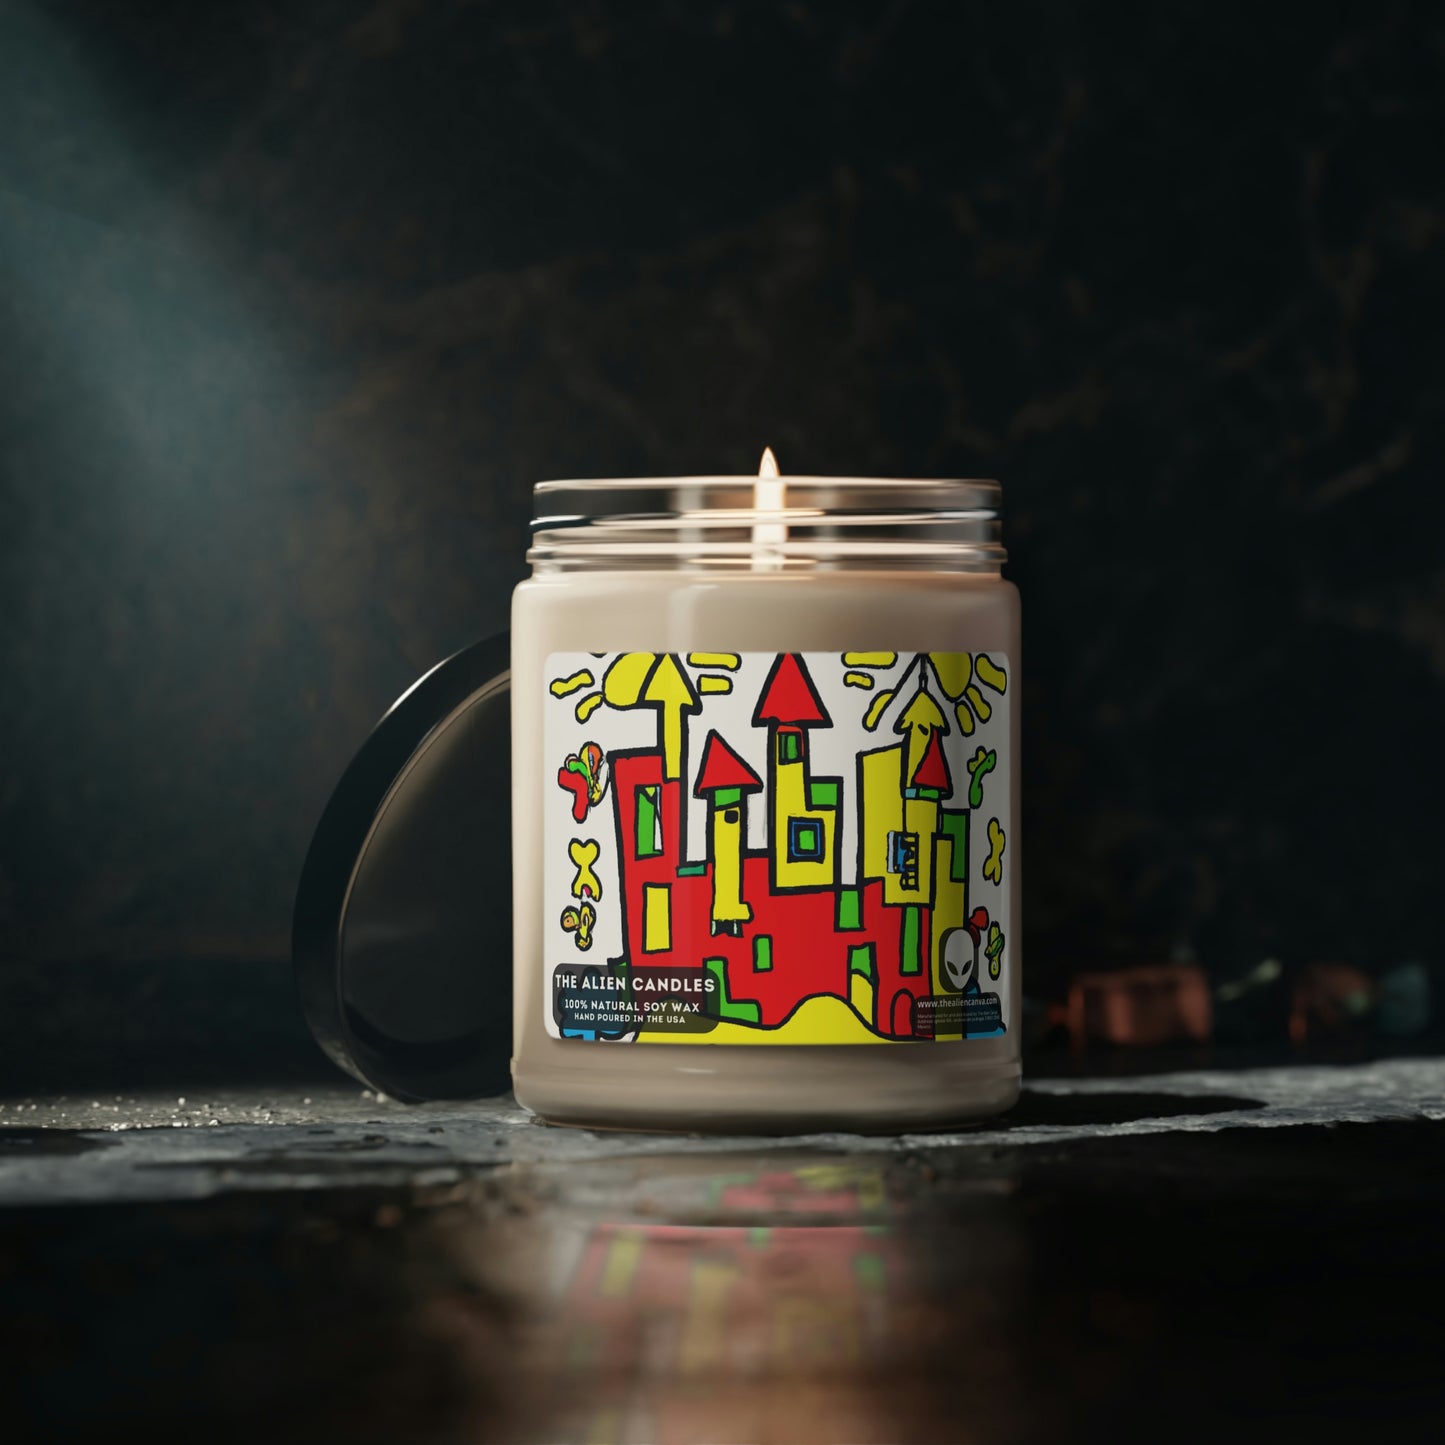 The Fading Dream of a Summer Castle - Scented Soy Candle, 9oz - The Alien Candles